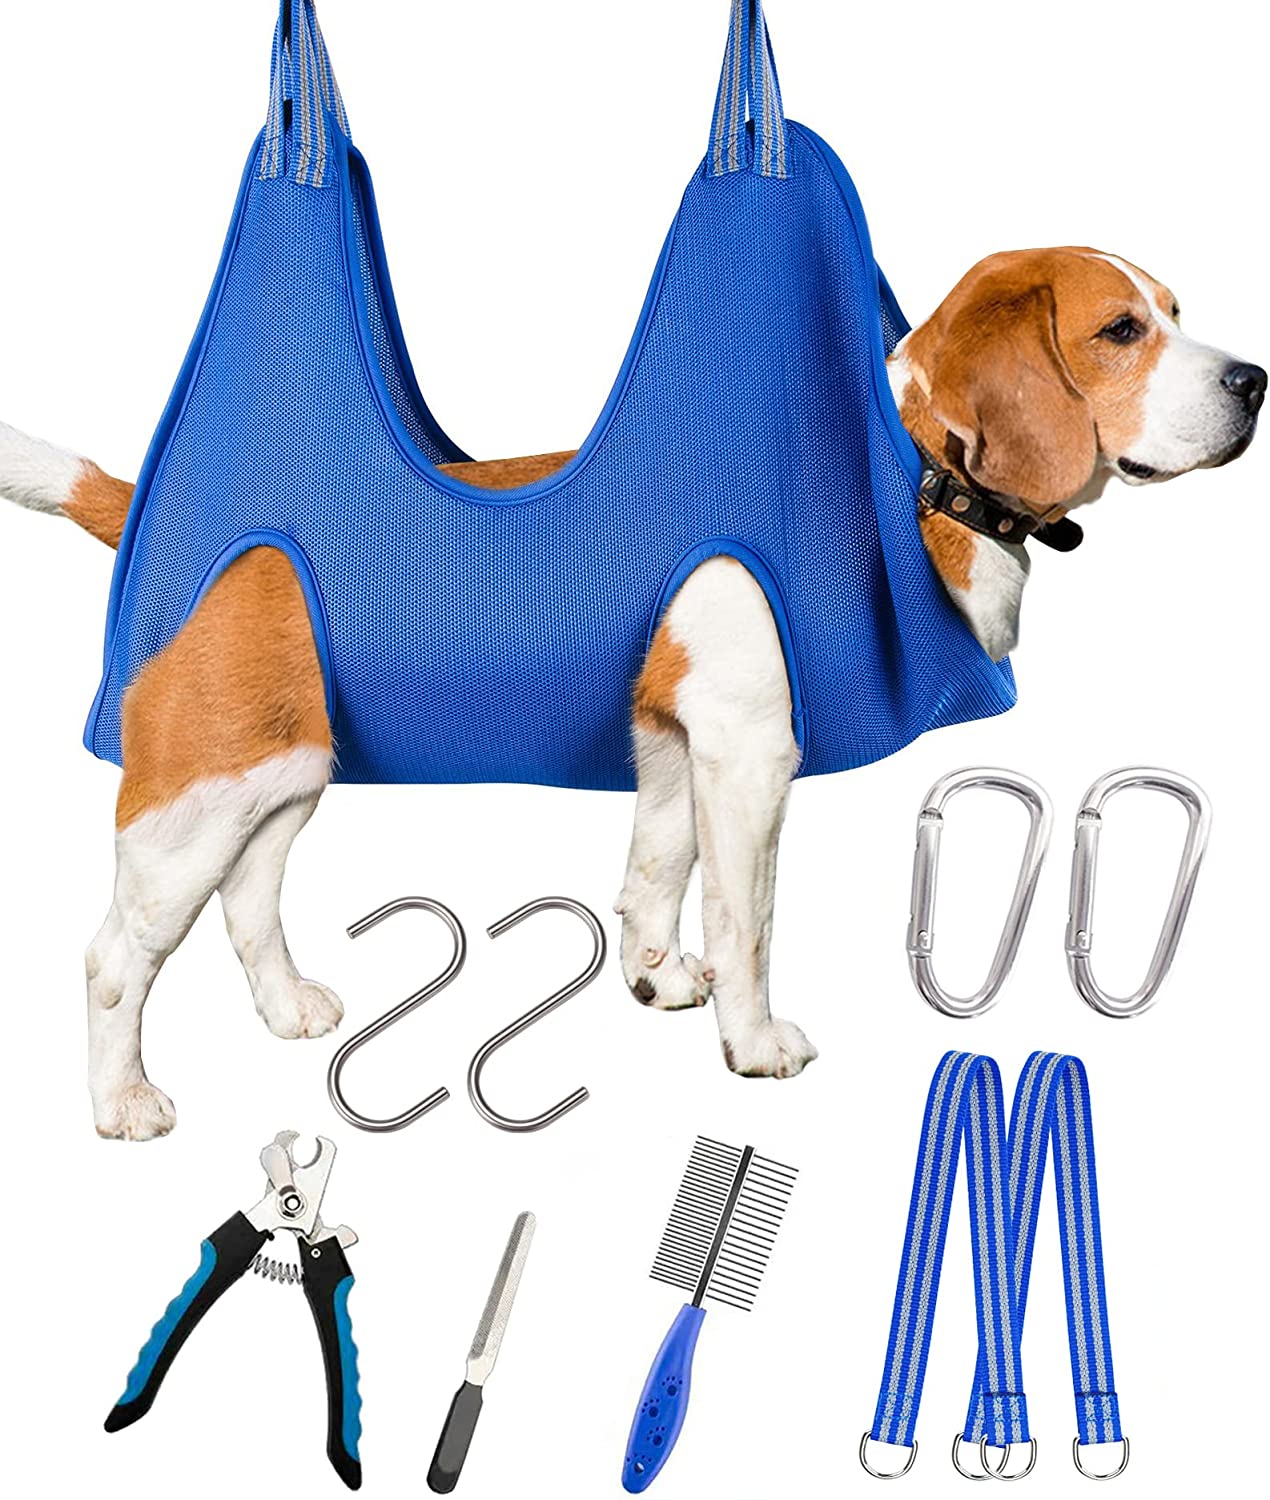 Hammock Harness with Nail Clippers